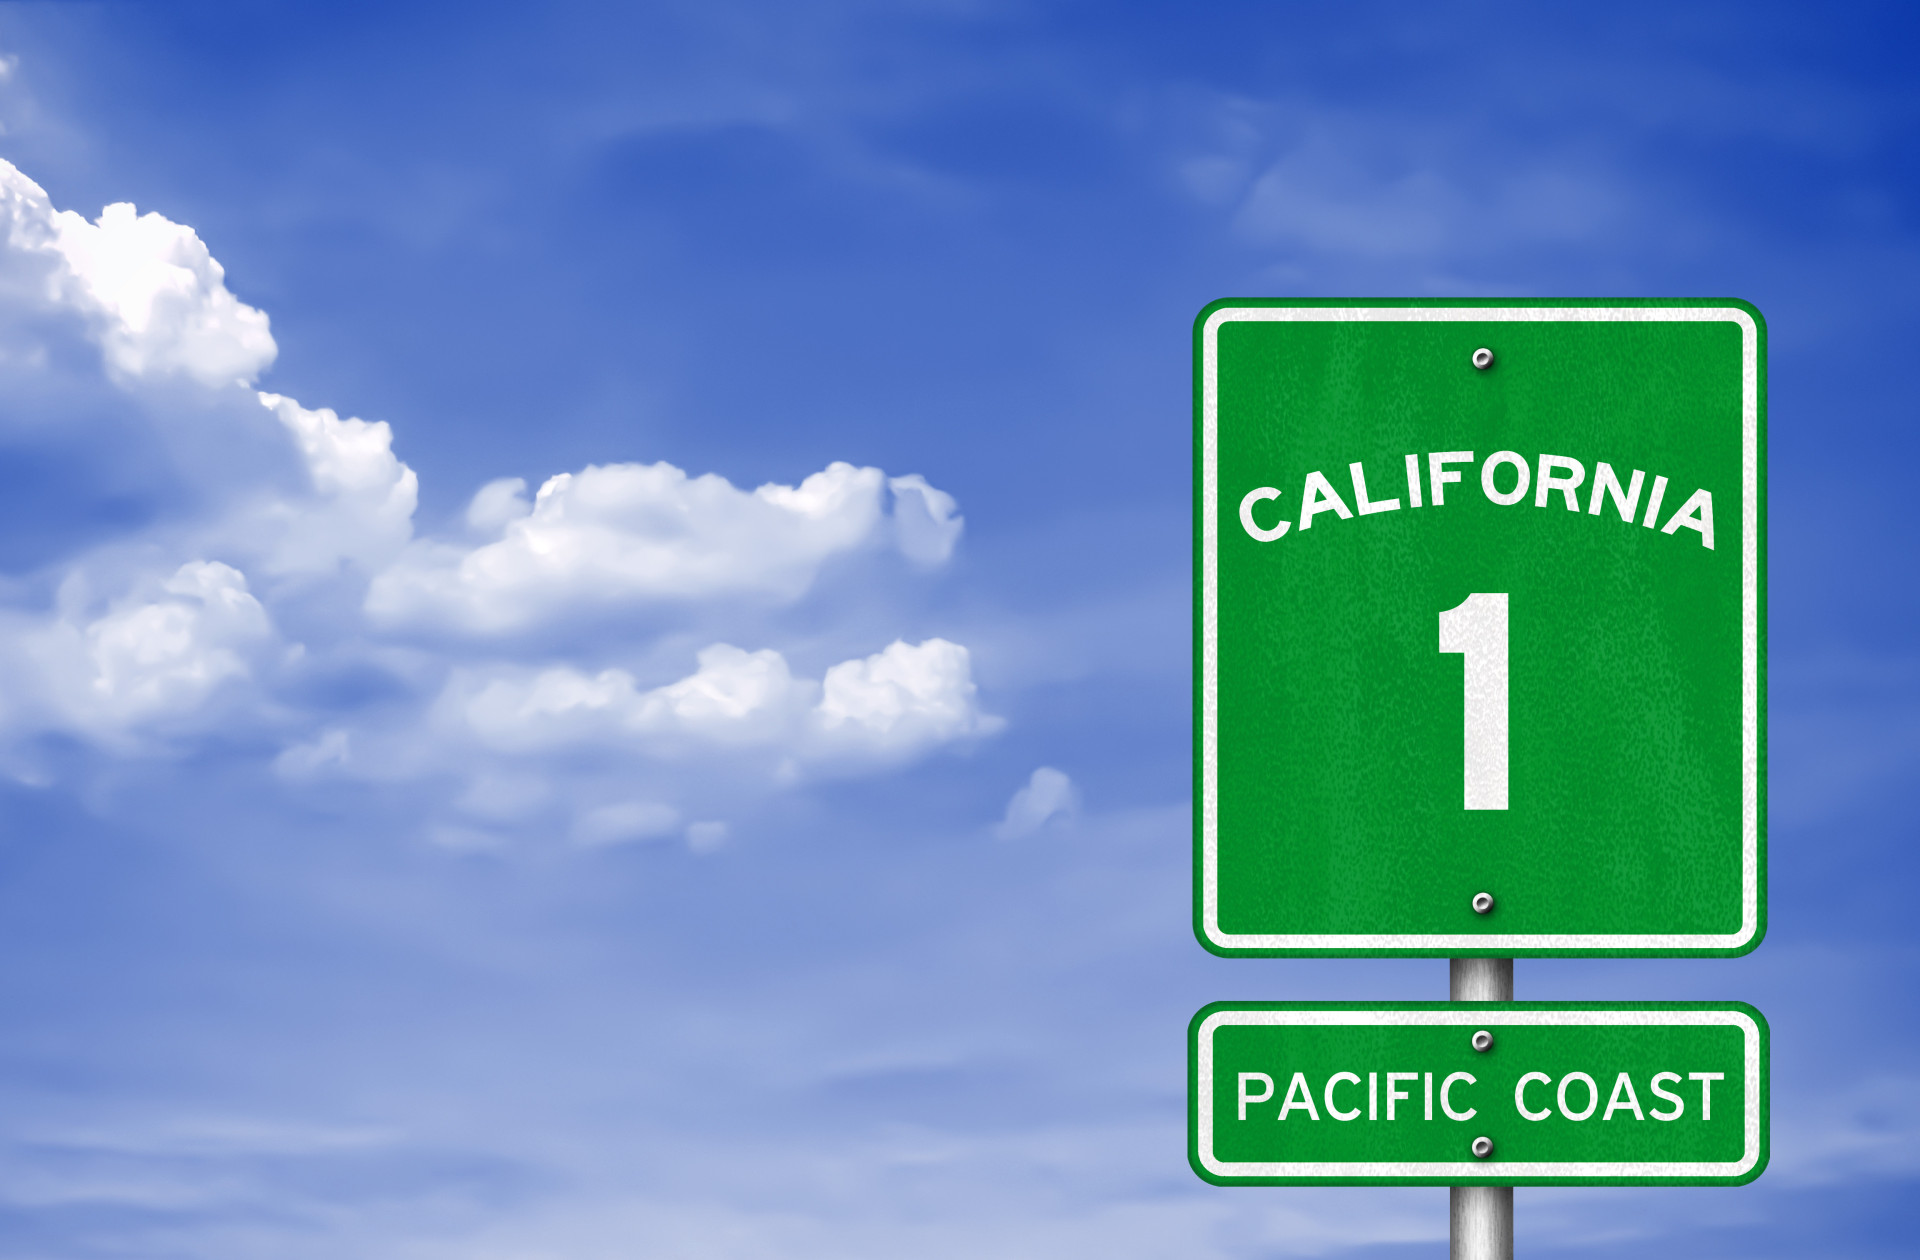 Continue your trip up the Pacific Coast Highway.<p><a href="https://www.msn.com/en-us/community/channel/vid-7xx8mnucu55yw63we9va2gwr7uihbxwc68fxqp25x6tg4ftibpra?cvid=94631541bc0f4f89bfd59158d696ad7e">Follow us and access great exclusive content every day</a></p>